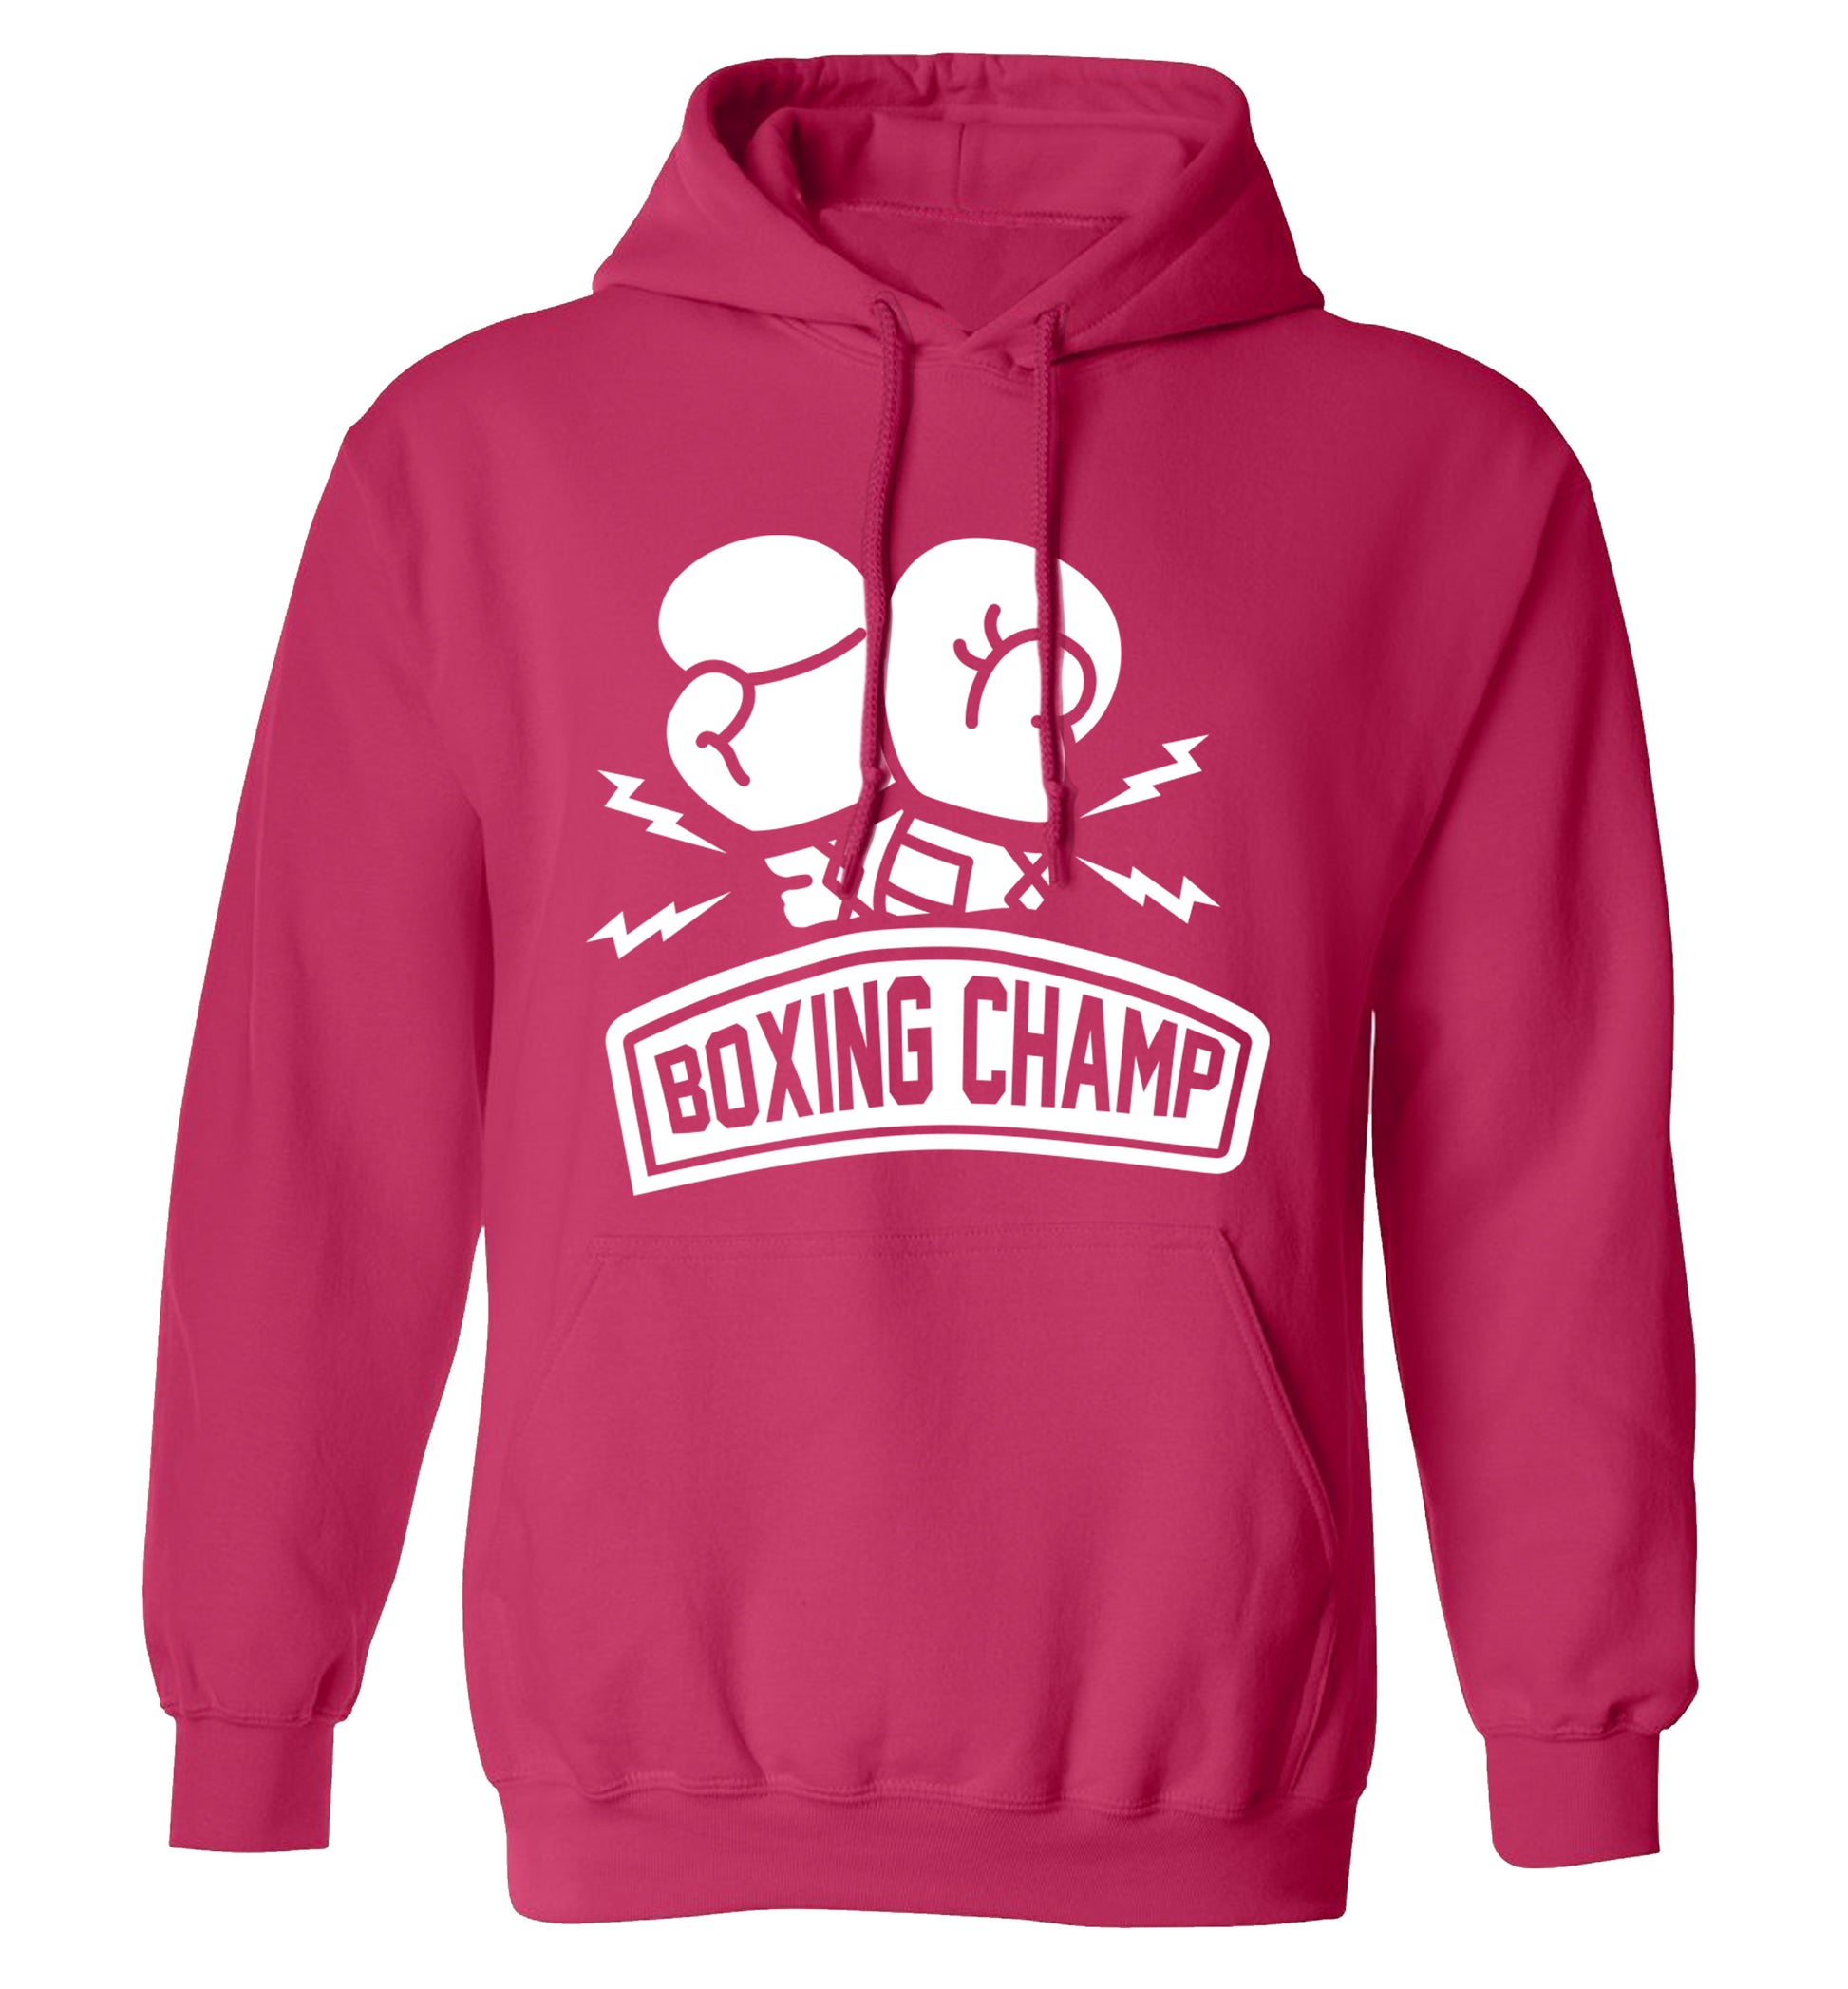 Boxing Champ adults unisex pink hoodie 2XL